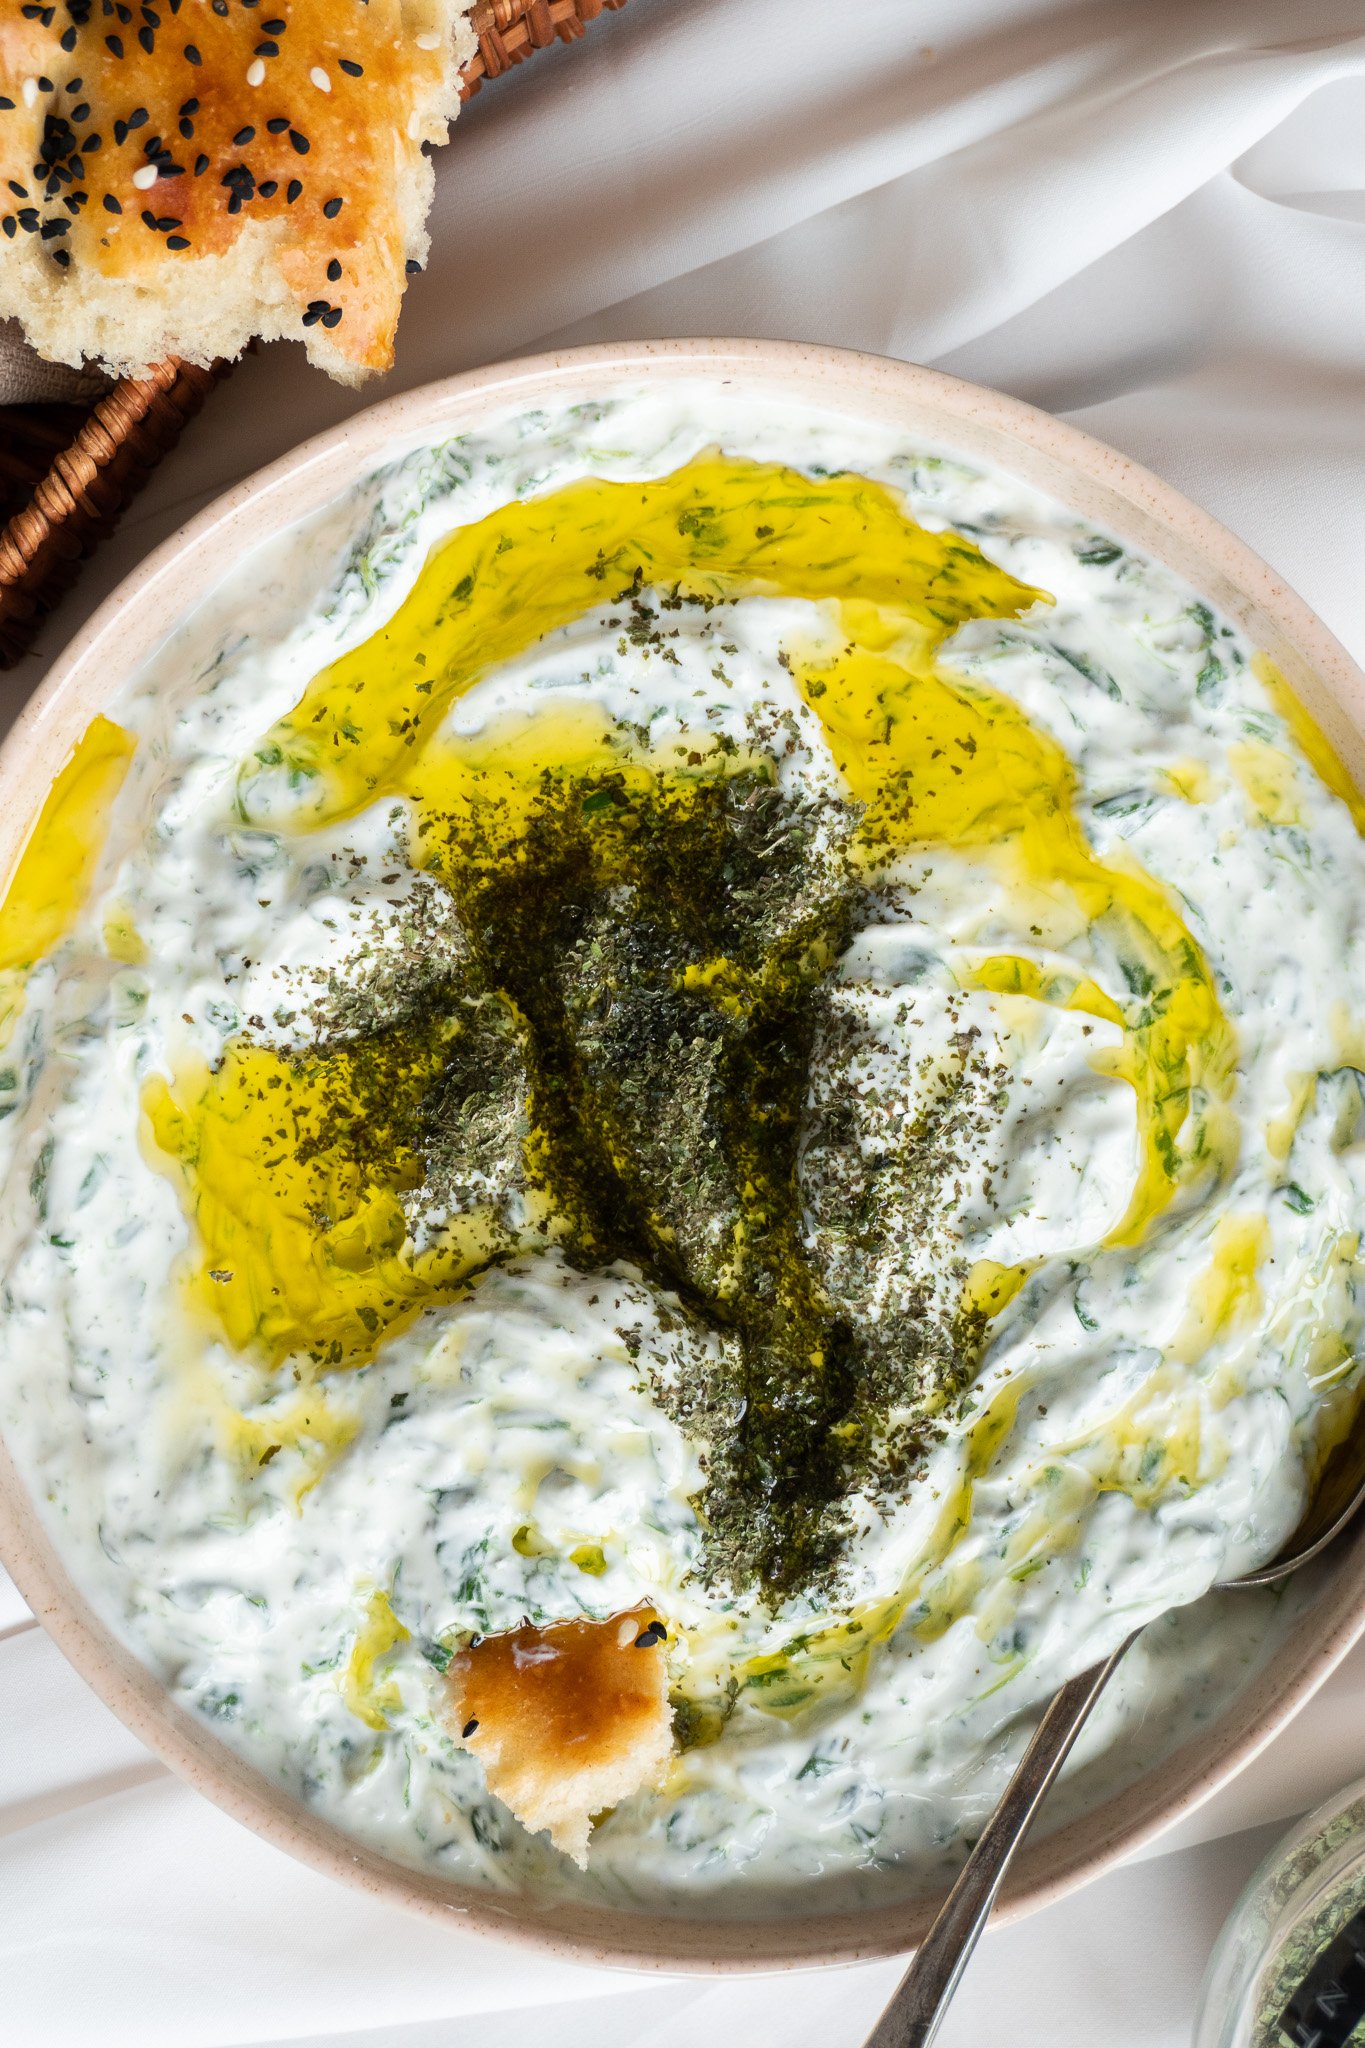 A close-up of Borani Esfenaj, a creamy and refreshing yogurt dip that is popular in Iranian cuisine. The dip is made with spinach, garlic, and is garnished with dried mint leaves.